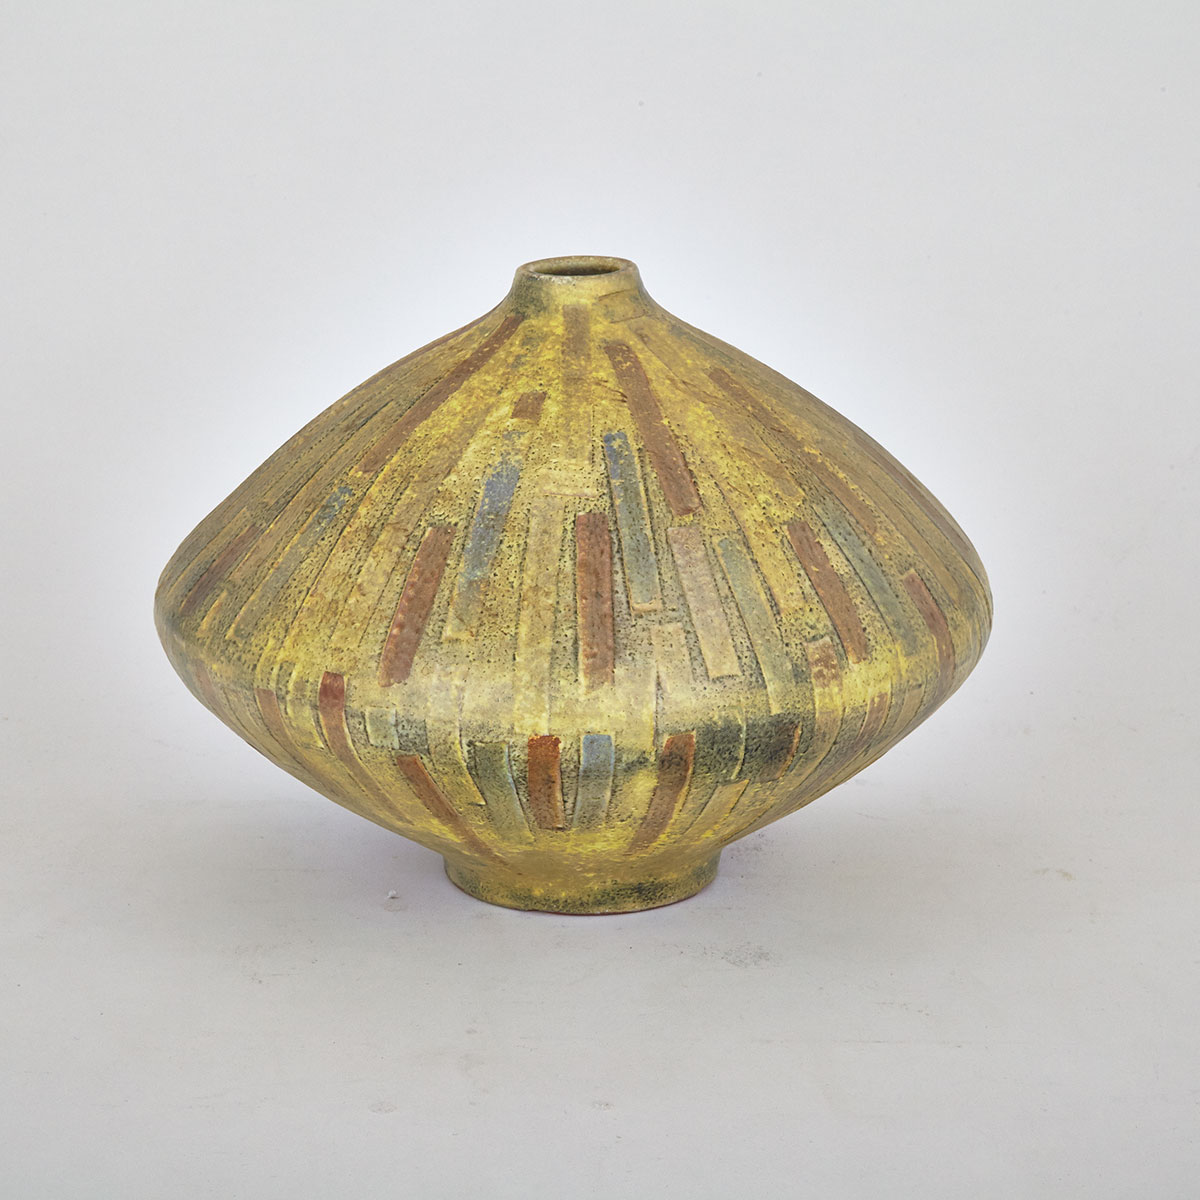 Brooklin Pottery Vase, Theo and Susan Harlander, 1960s